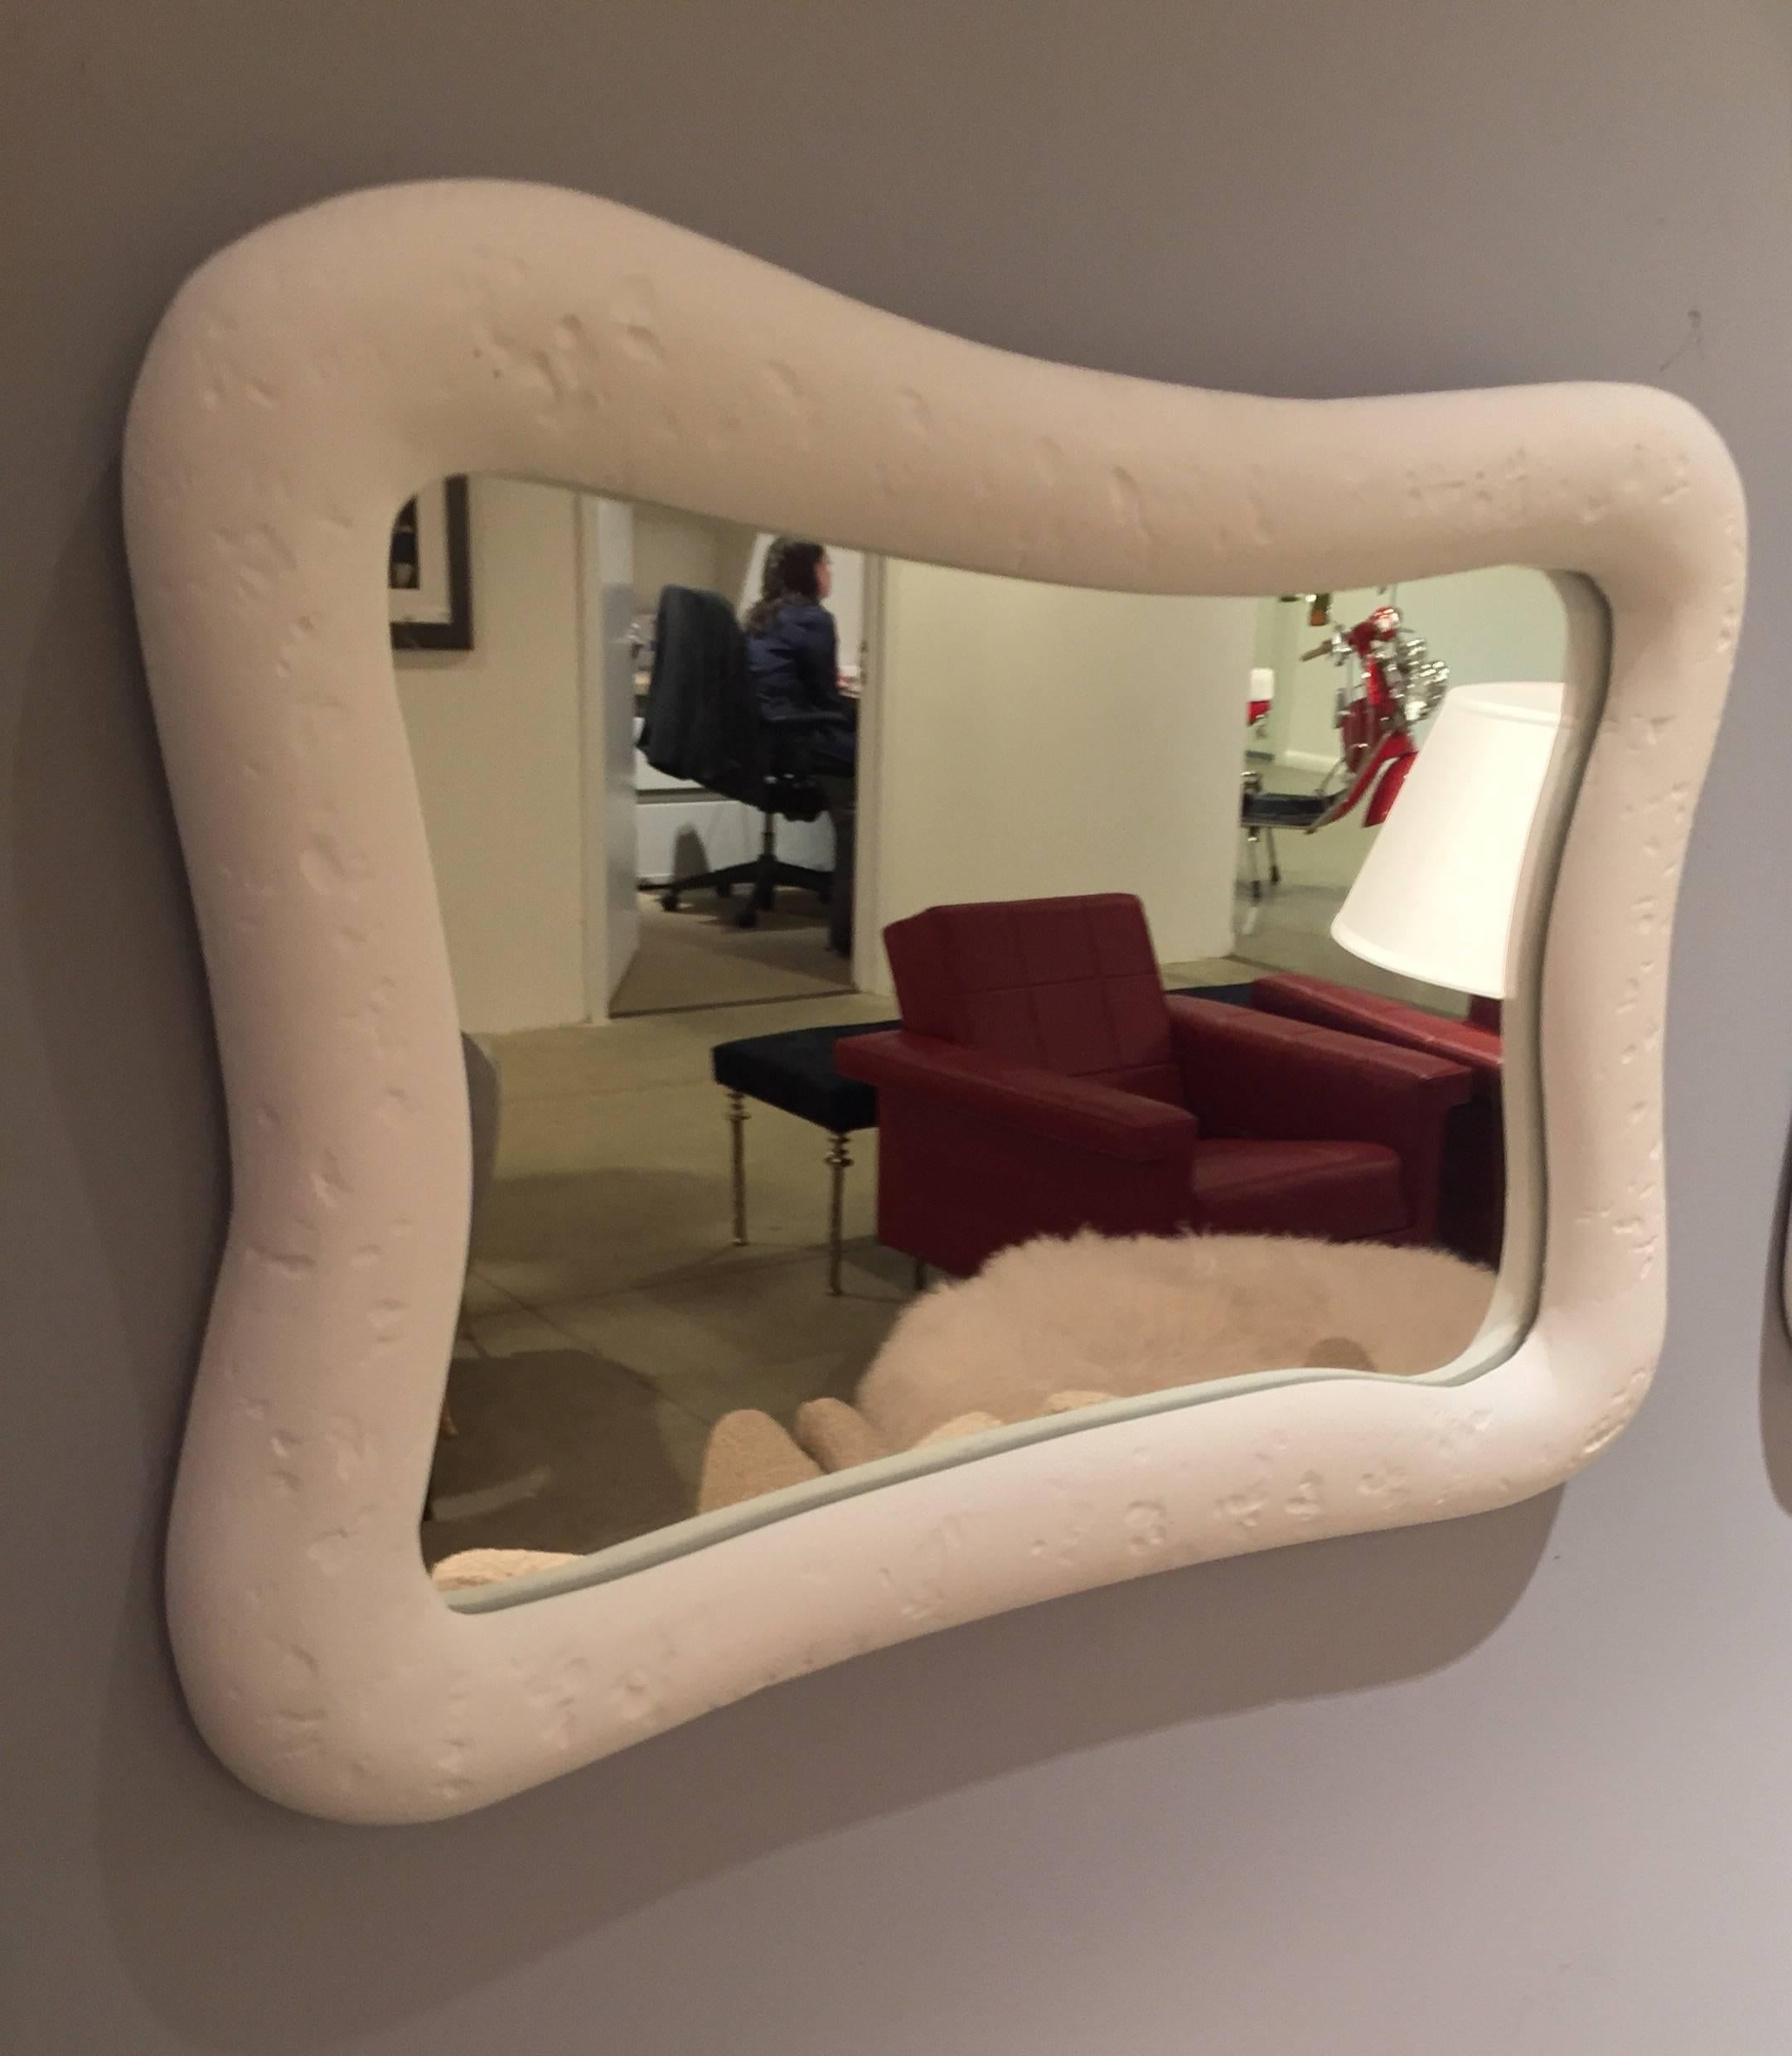 American Collection of Eight Republique Mirrors by Bourgeois Boheme Atelier